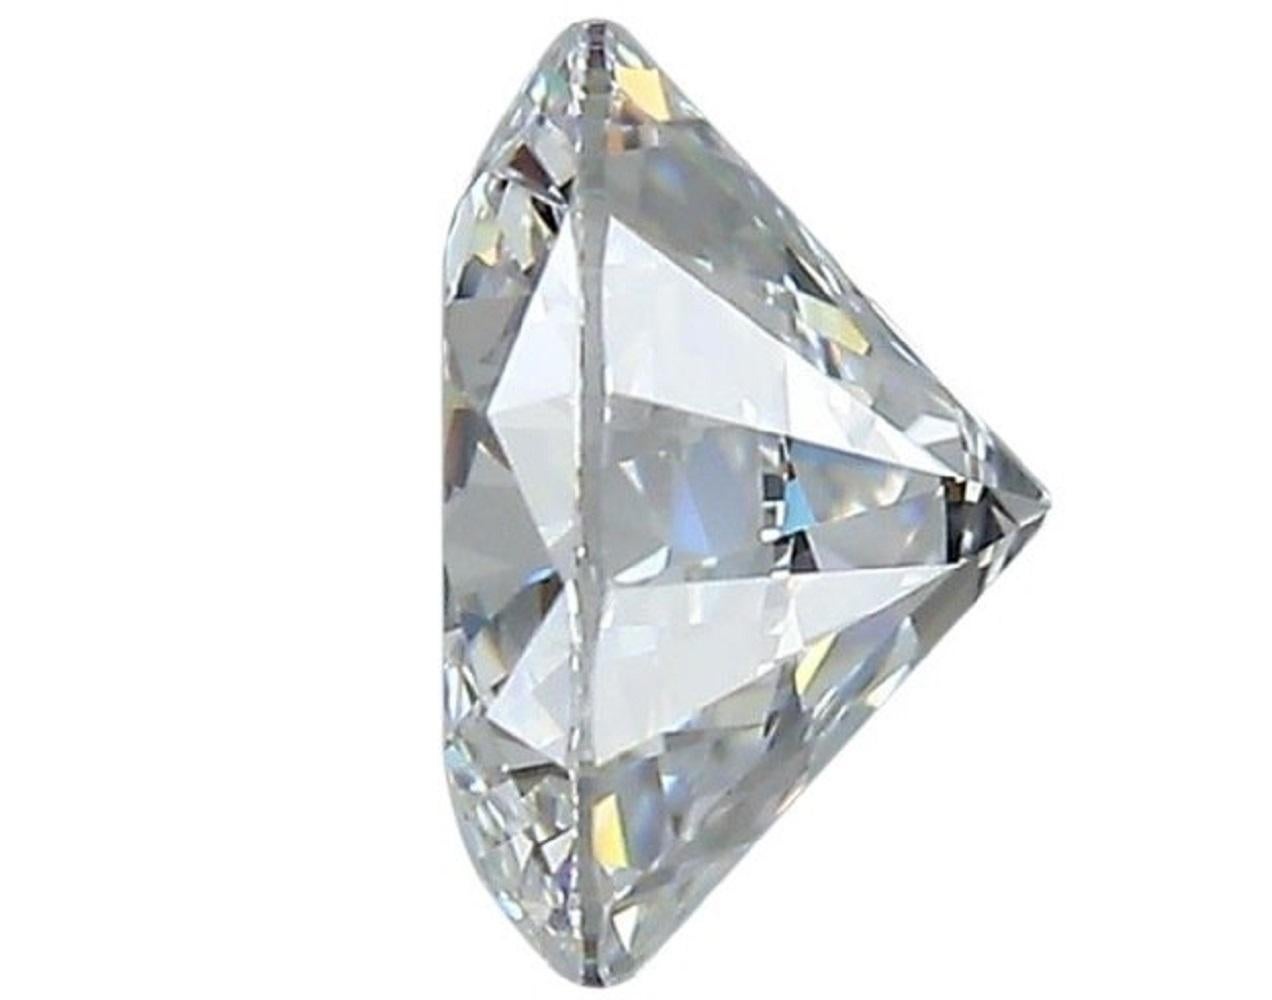 1 sparkling and flawless natural round brilliant diamond in a 0.71 carat D IF with excellent cut. This diamond have the highest possible color and clarity. It comes with IGI Certificate and laser inscription number.

SKU: E-212
IGI 557255293